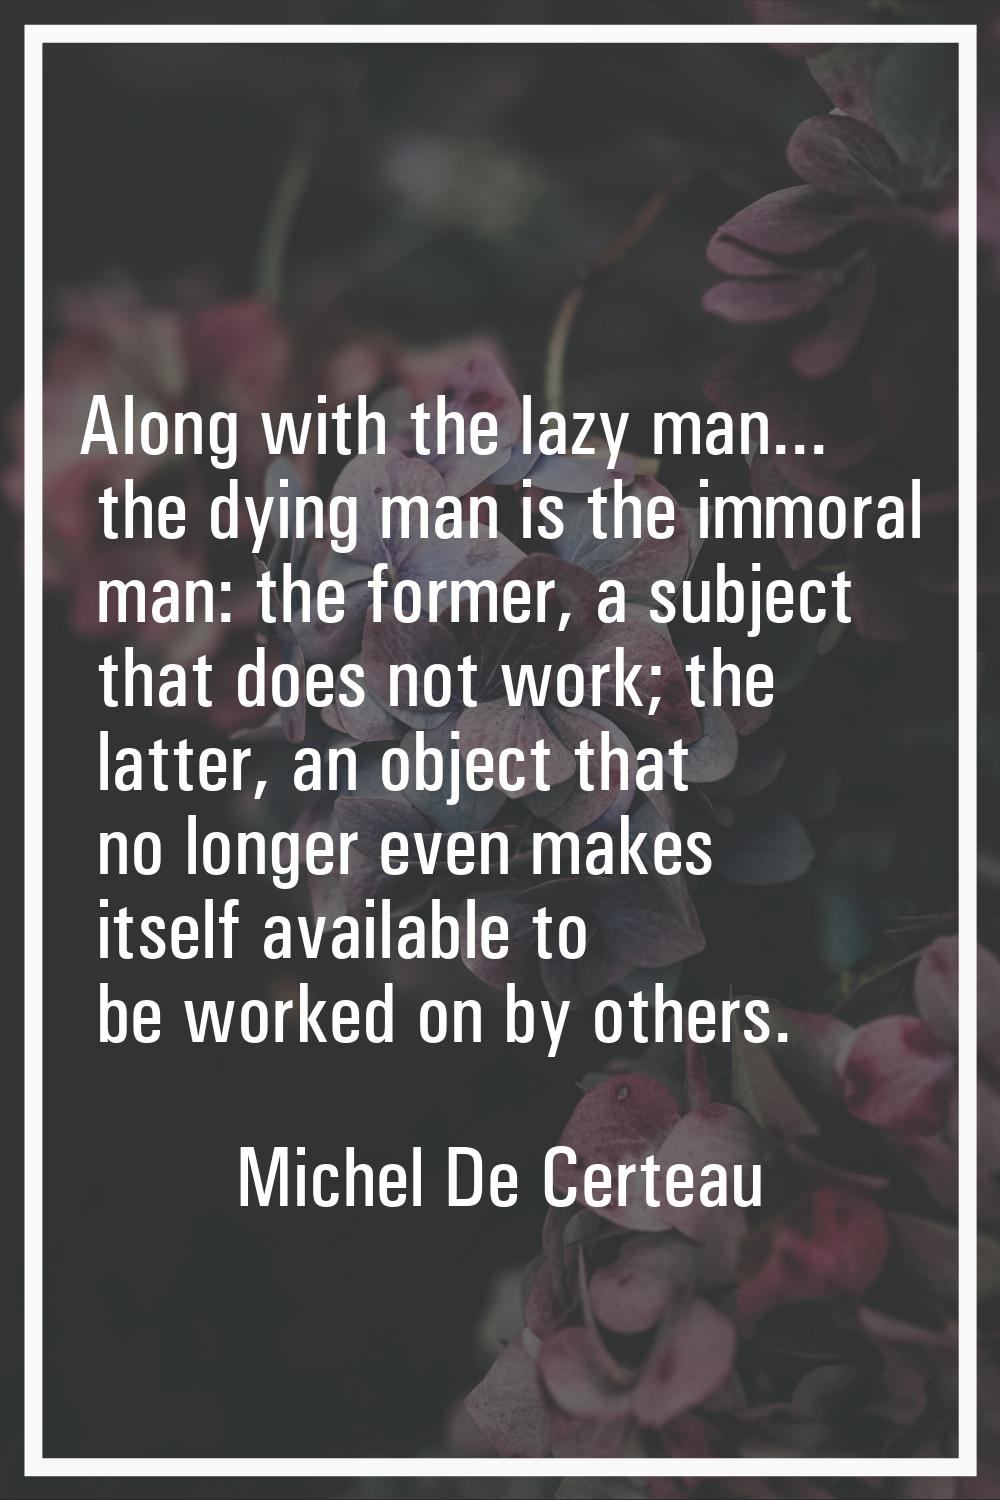 Along with the lazy man... the dying man is the immoral man: the former, a subject that does not wo